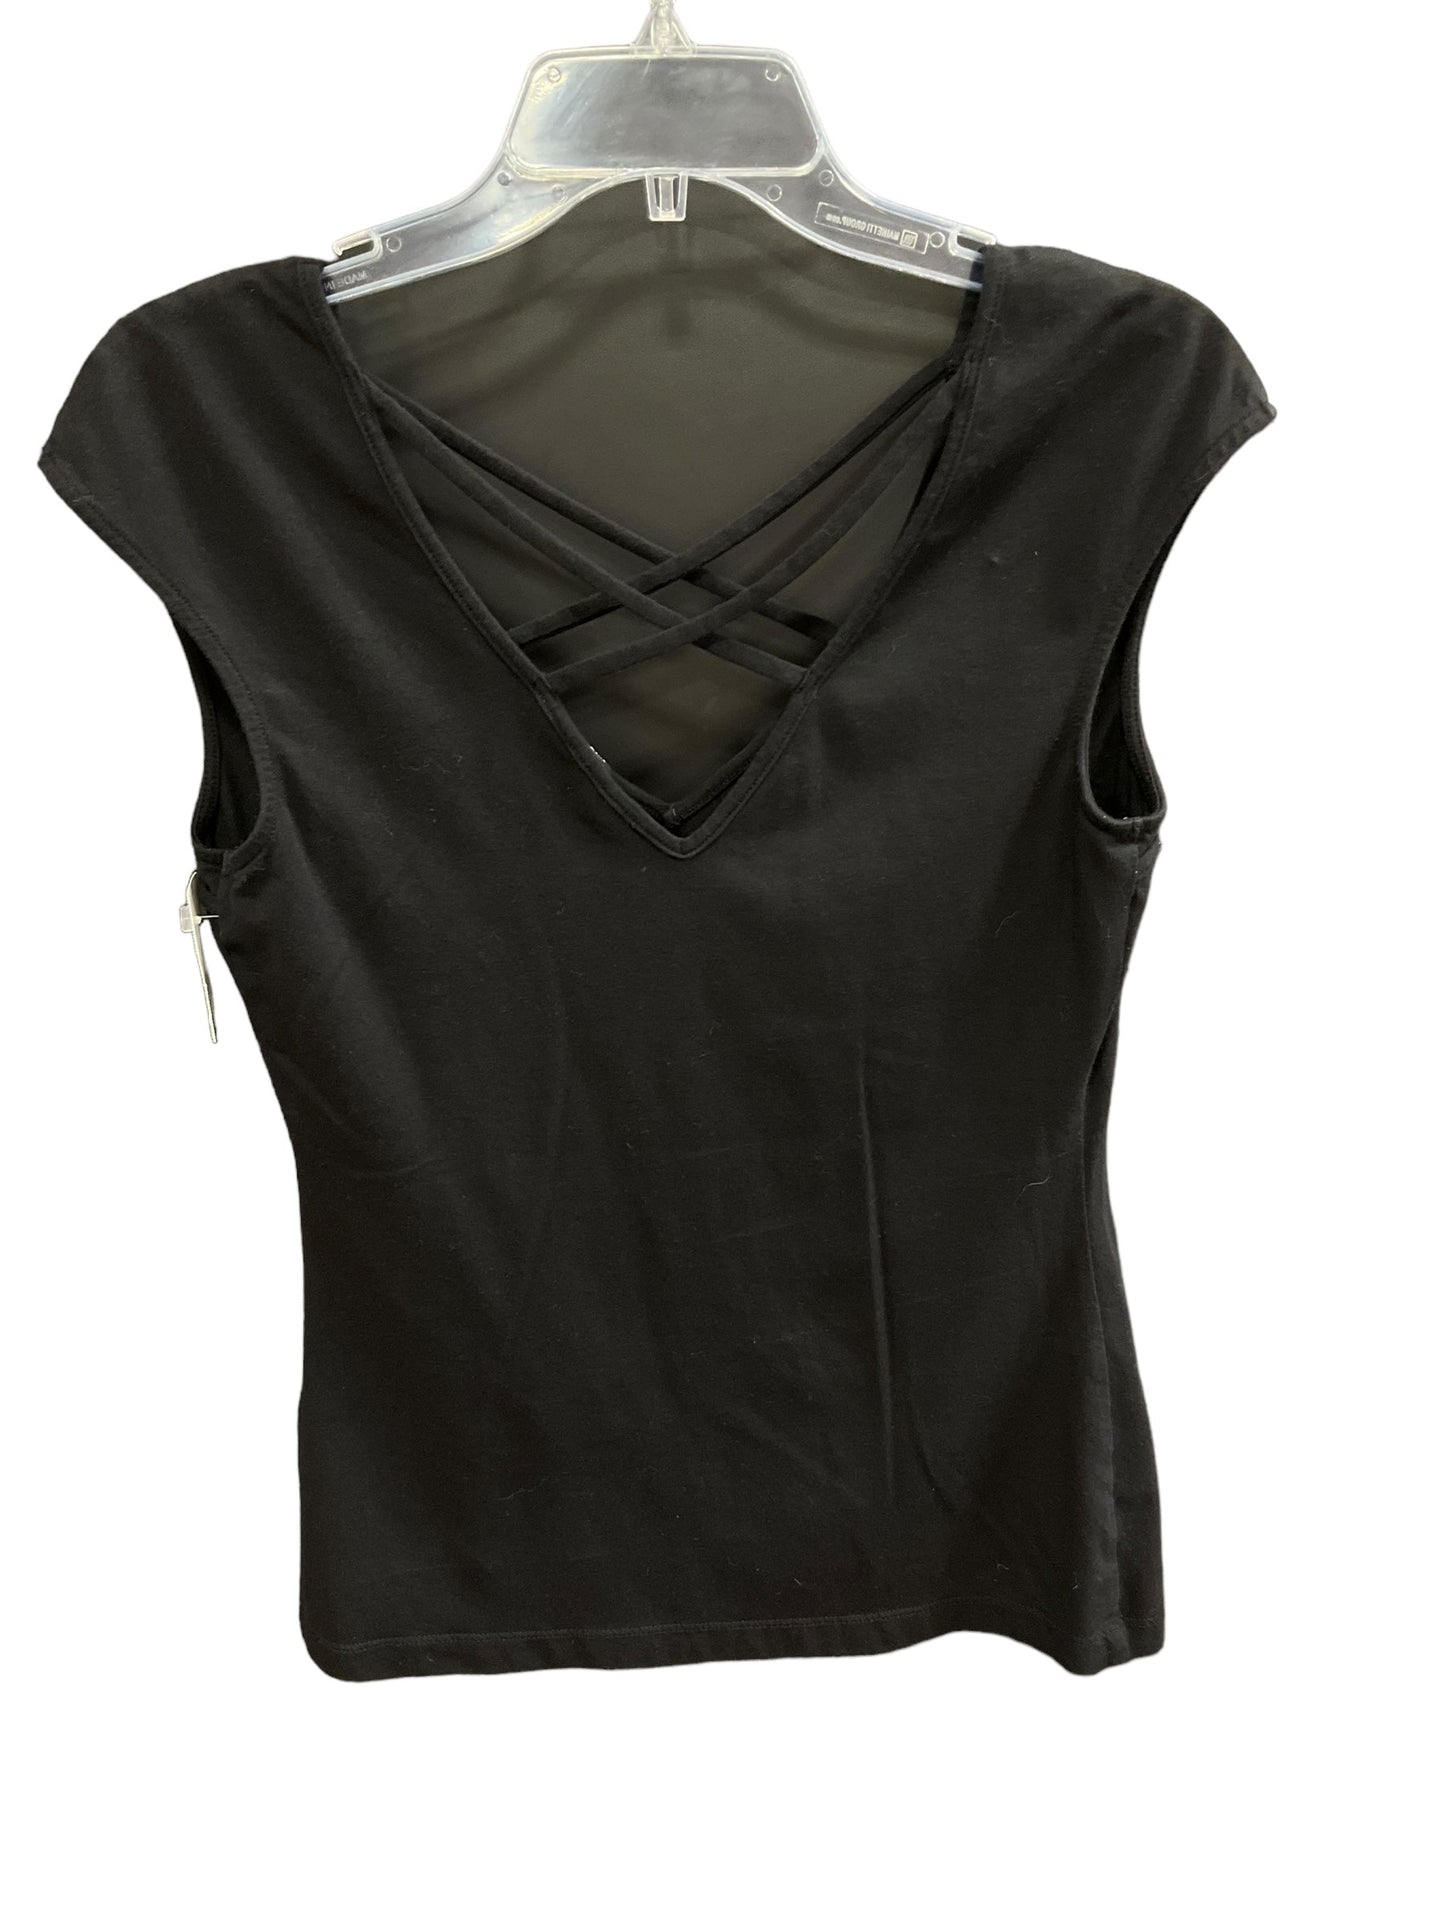 Black Top Short Sleeve Basic Guess, Size M